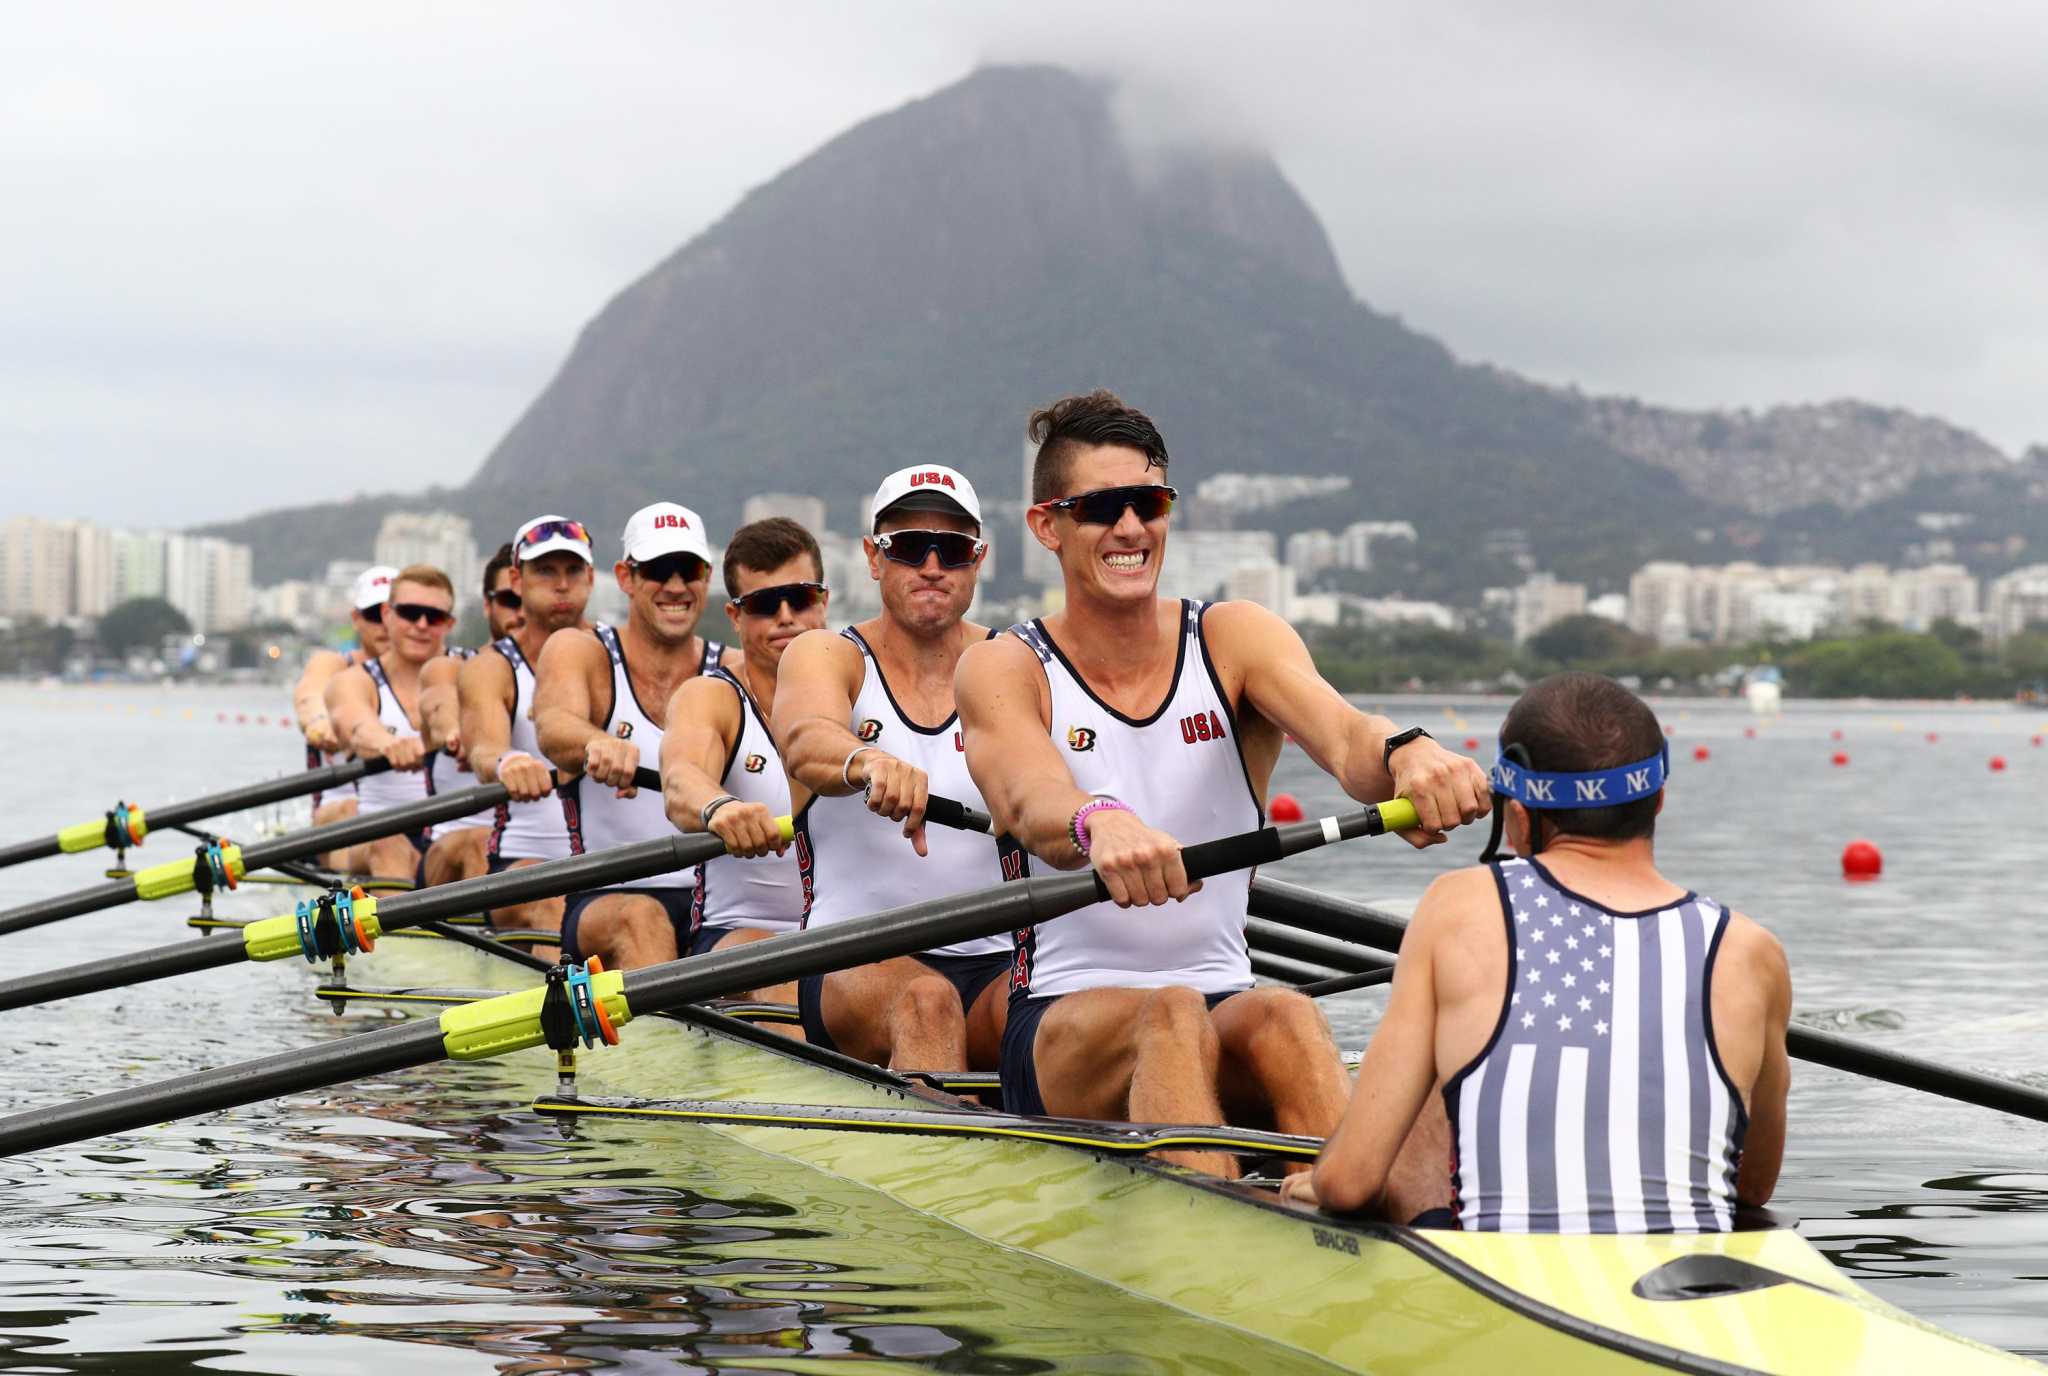 Two alumni of Old Lyme High School form the US Olympic rowing team فريق